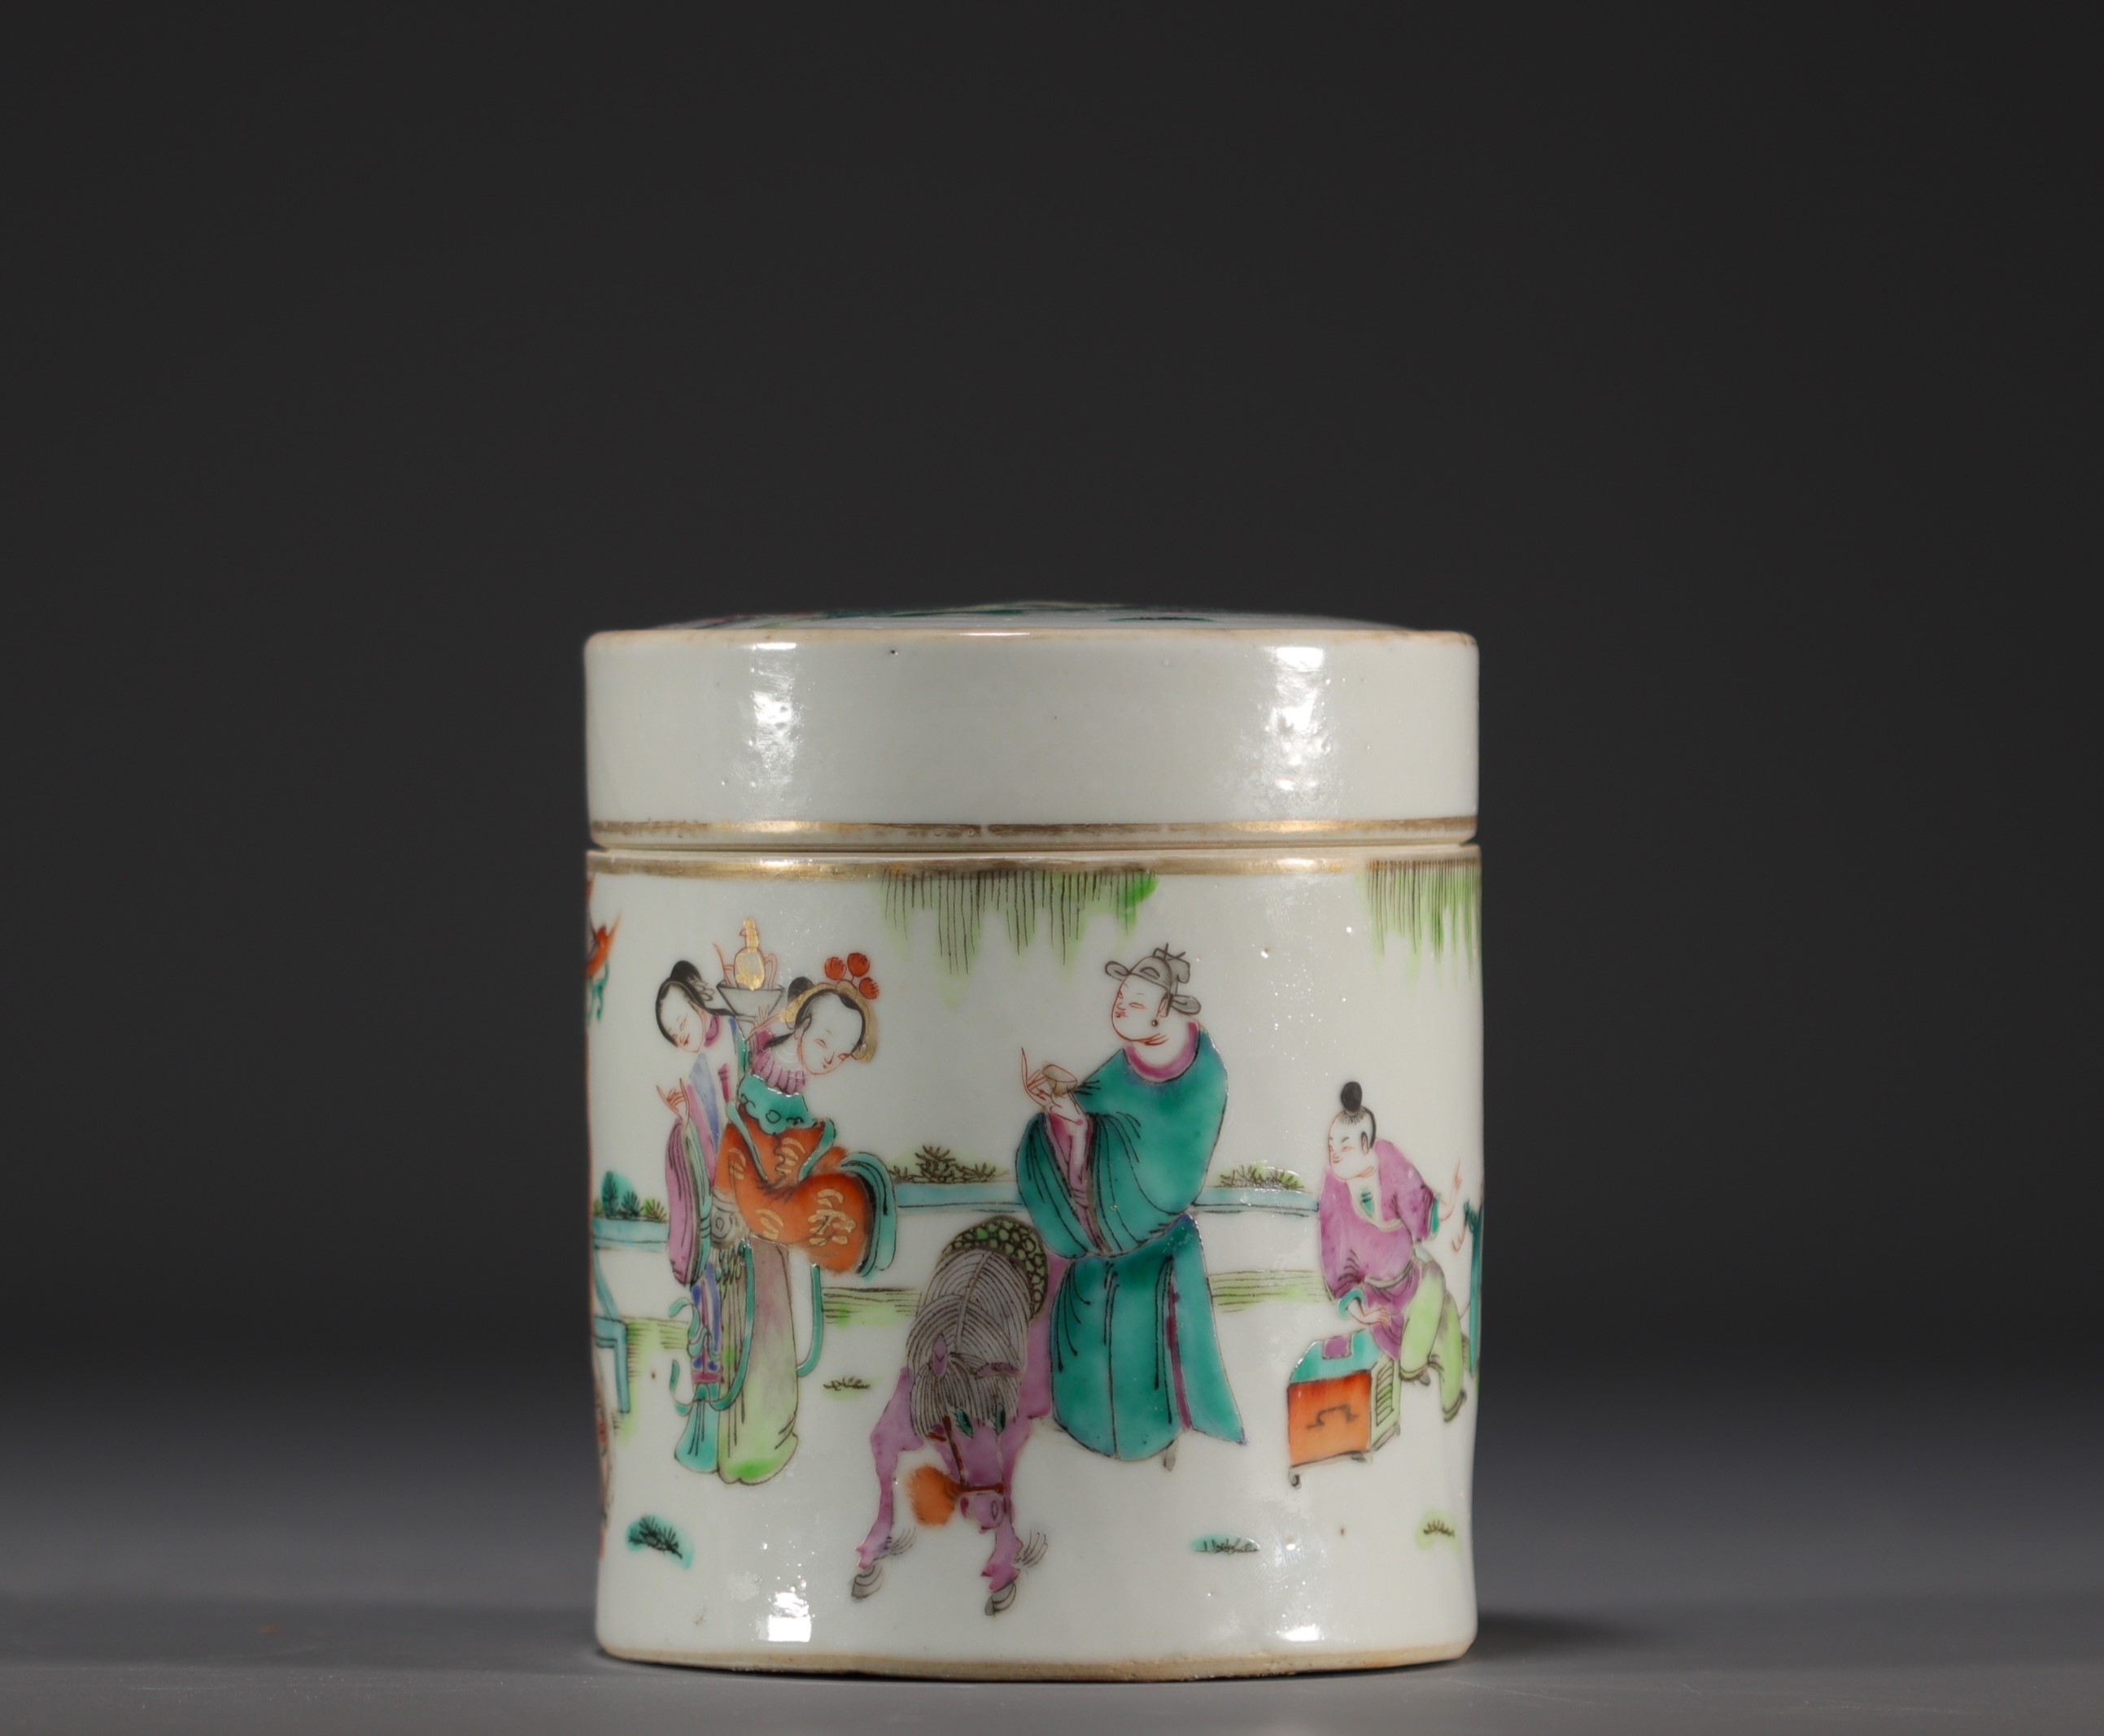 China - Famille rose porcelain box decorated with characters.